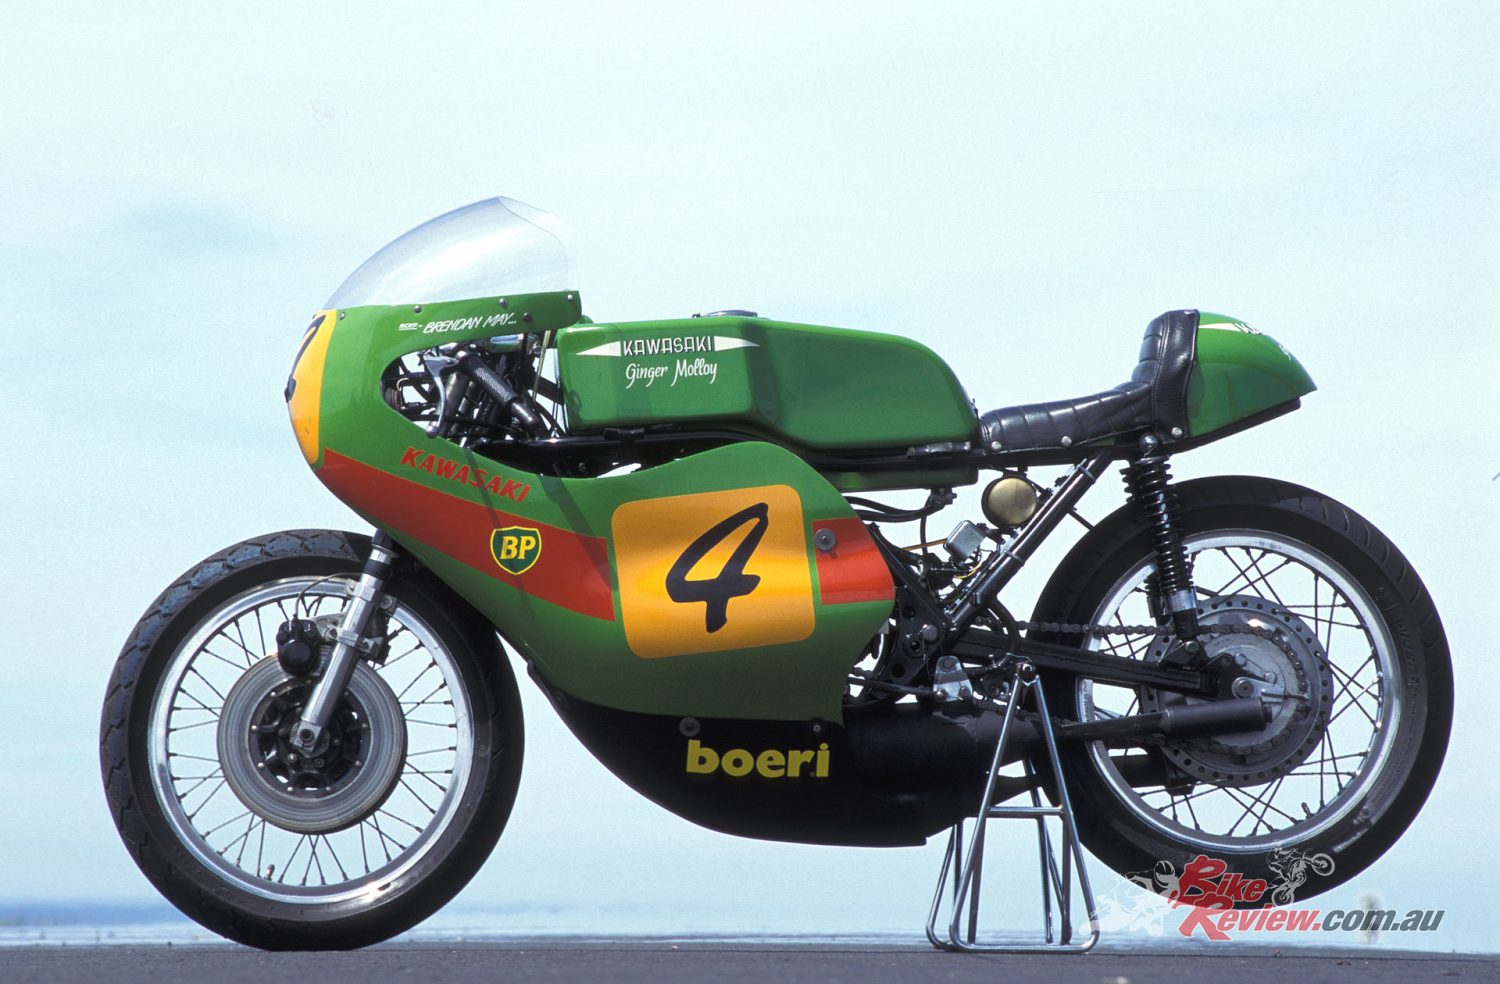 "To find a period racer of any kind in such original, authentic condition, yet still capable of winning races is a rare event, but all the more so when it’s one of the early customer GP two-stroke."